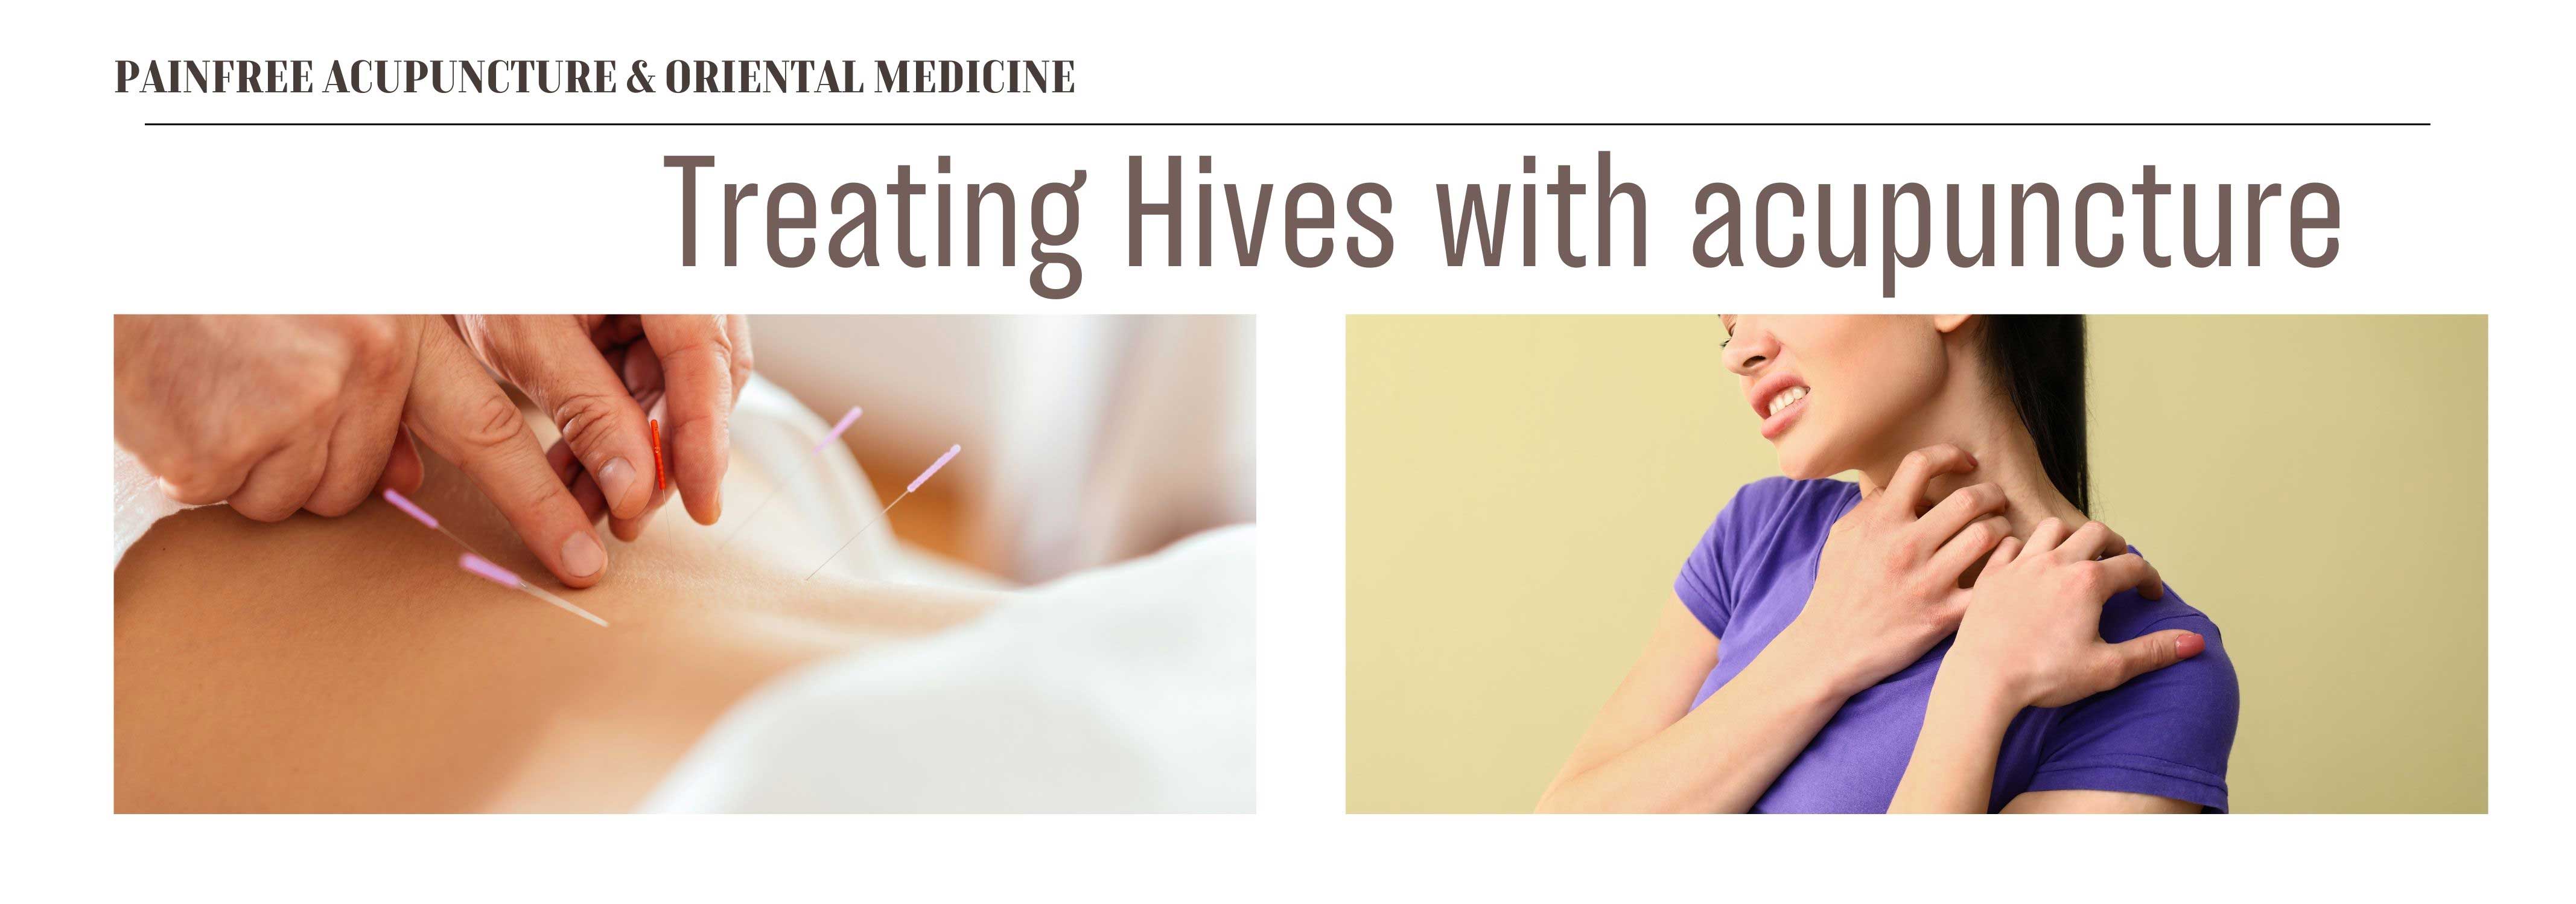 acupuncture for hives